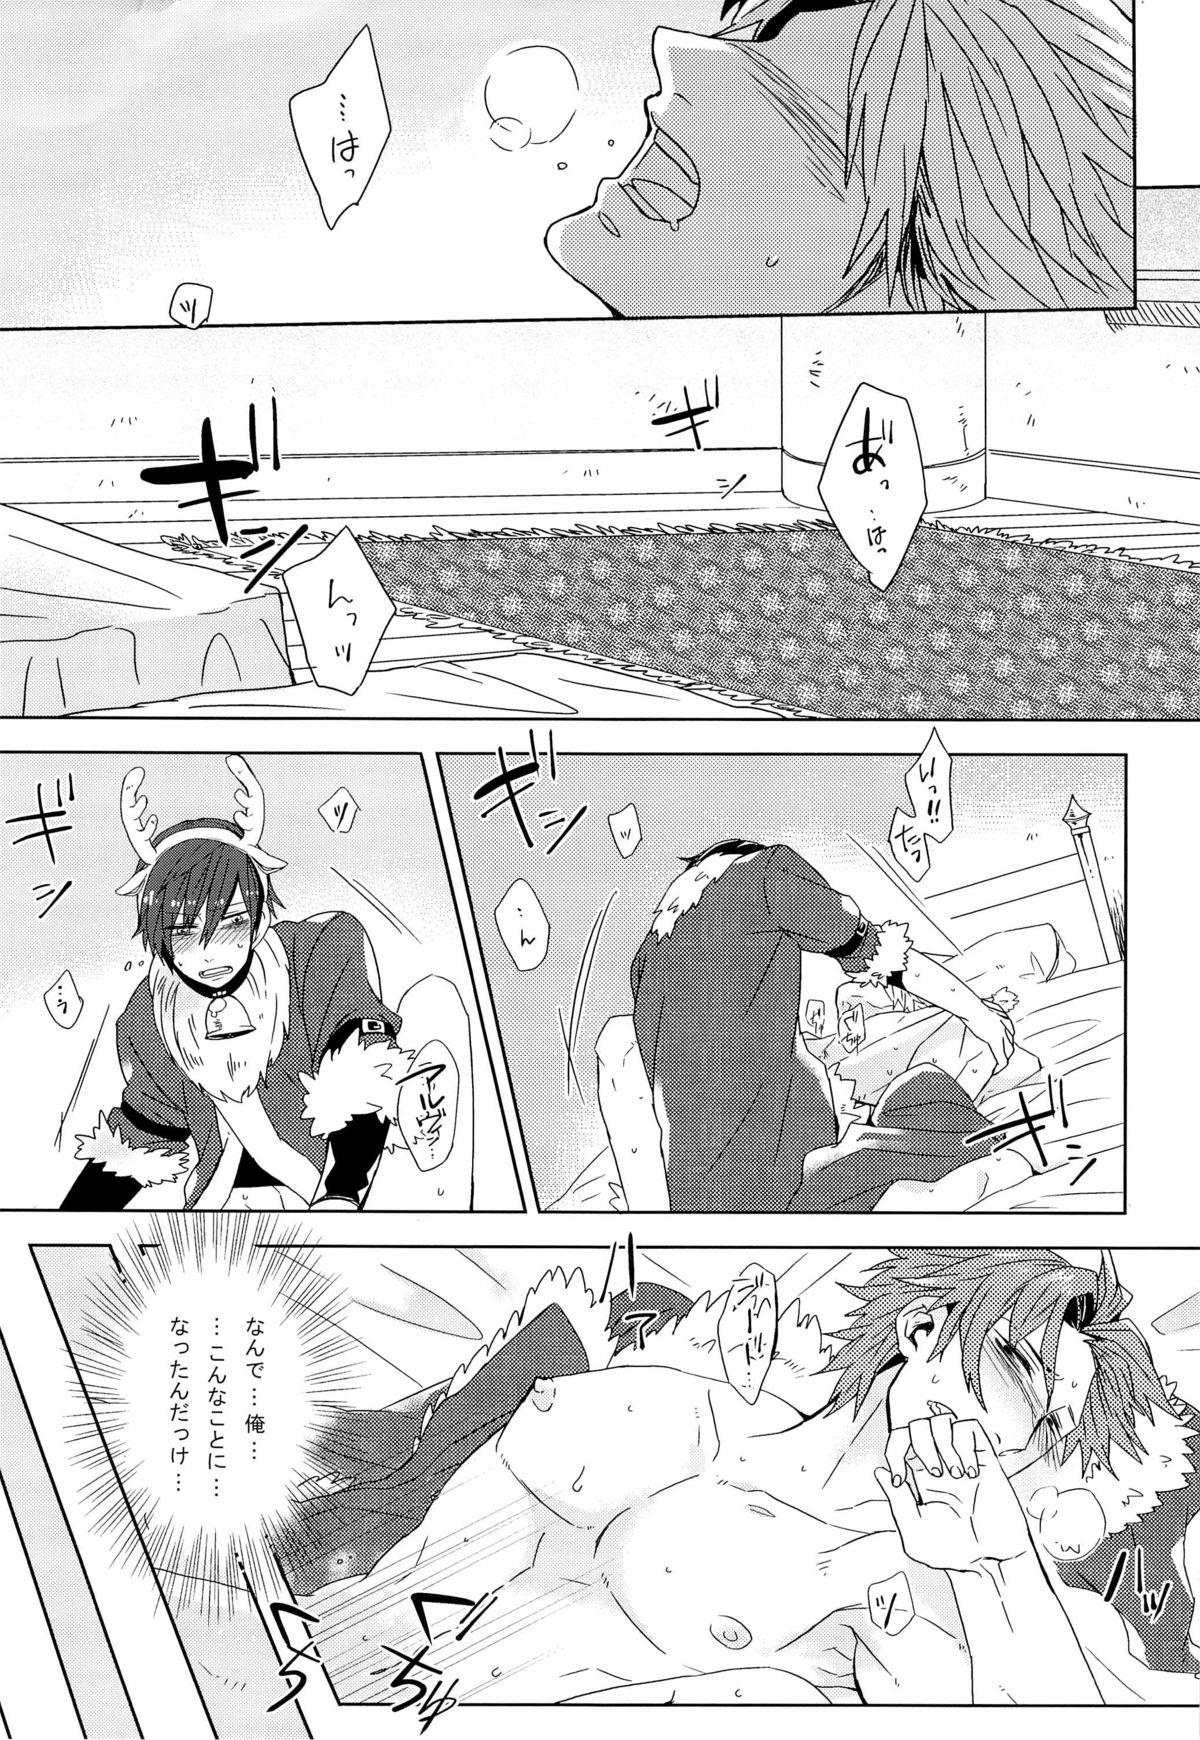 Cruising Merry Christmas! - Tales of xillia Tales of From - Page 7